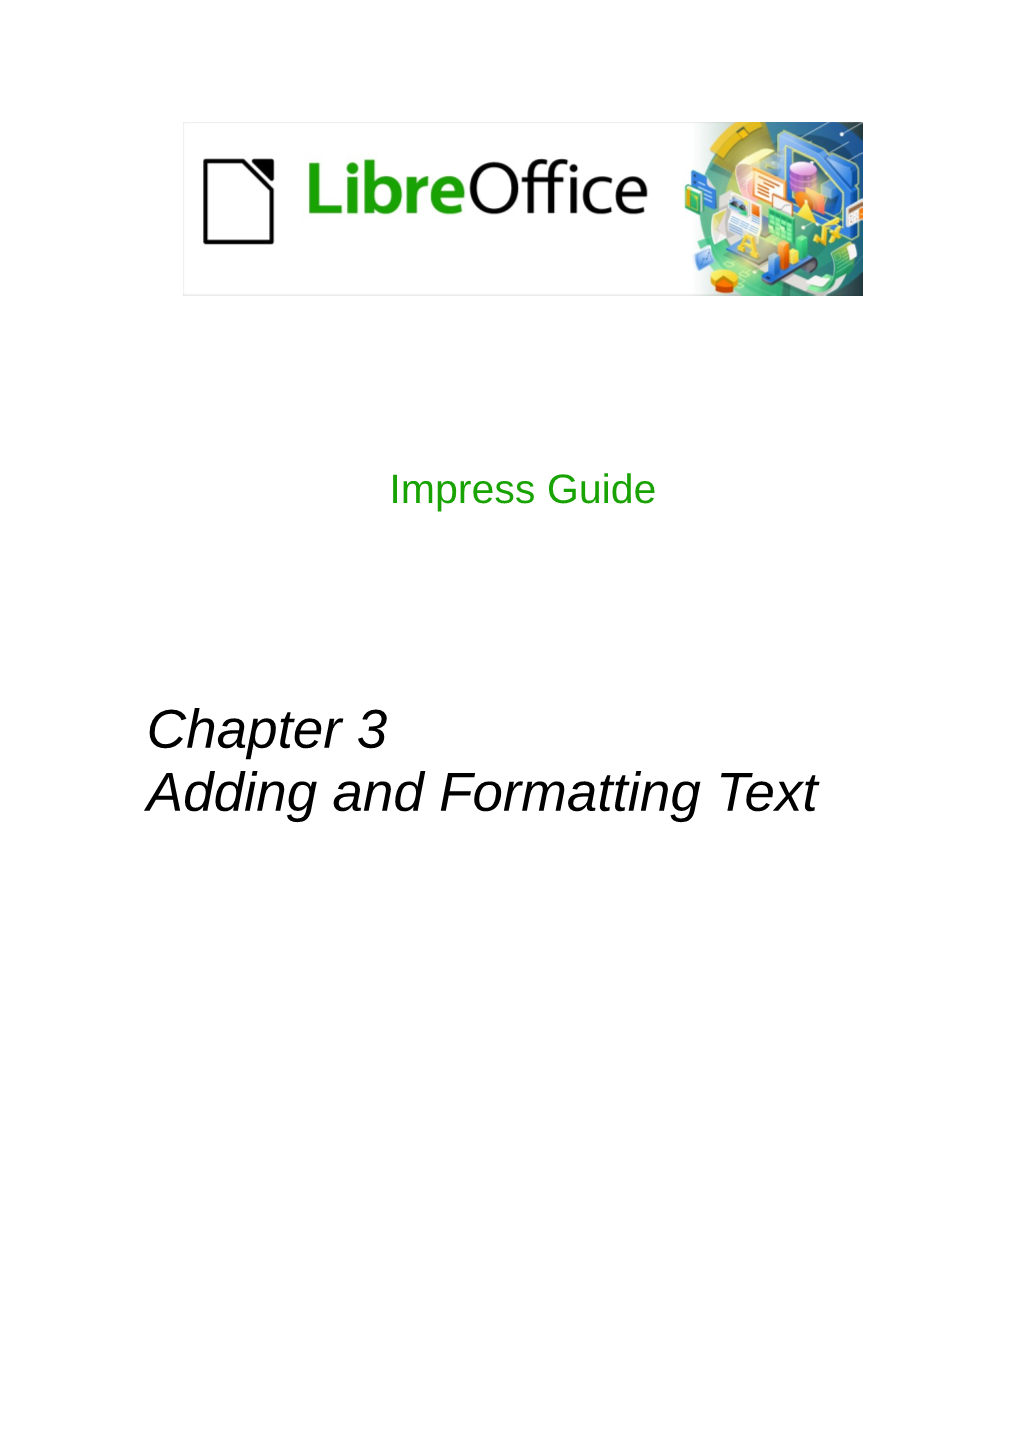 Chapter 3, Adding and Formatting Text | 3 Creating Lists